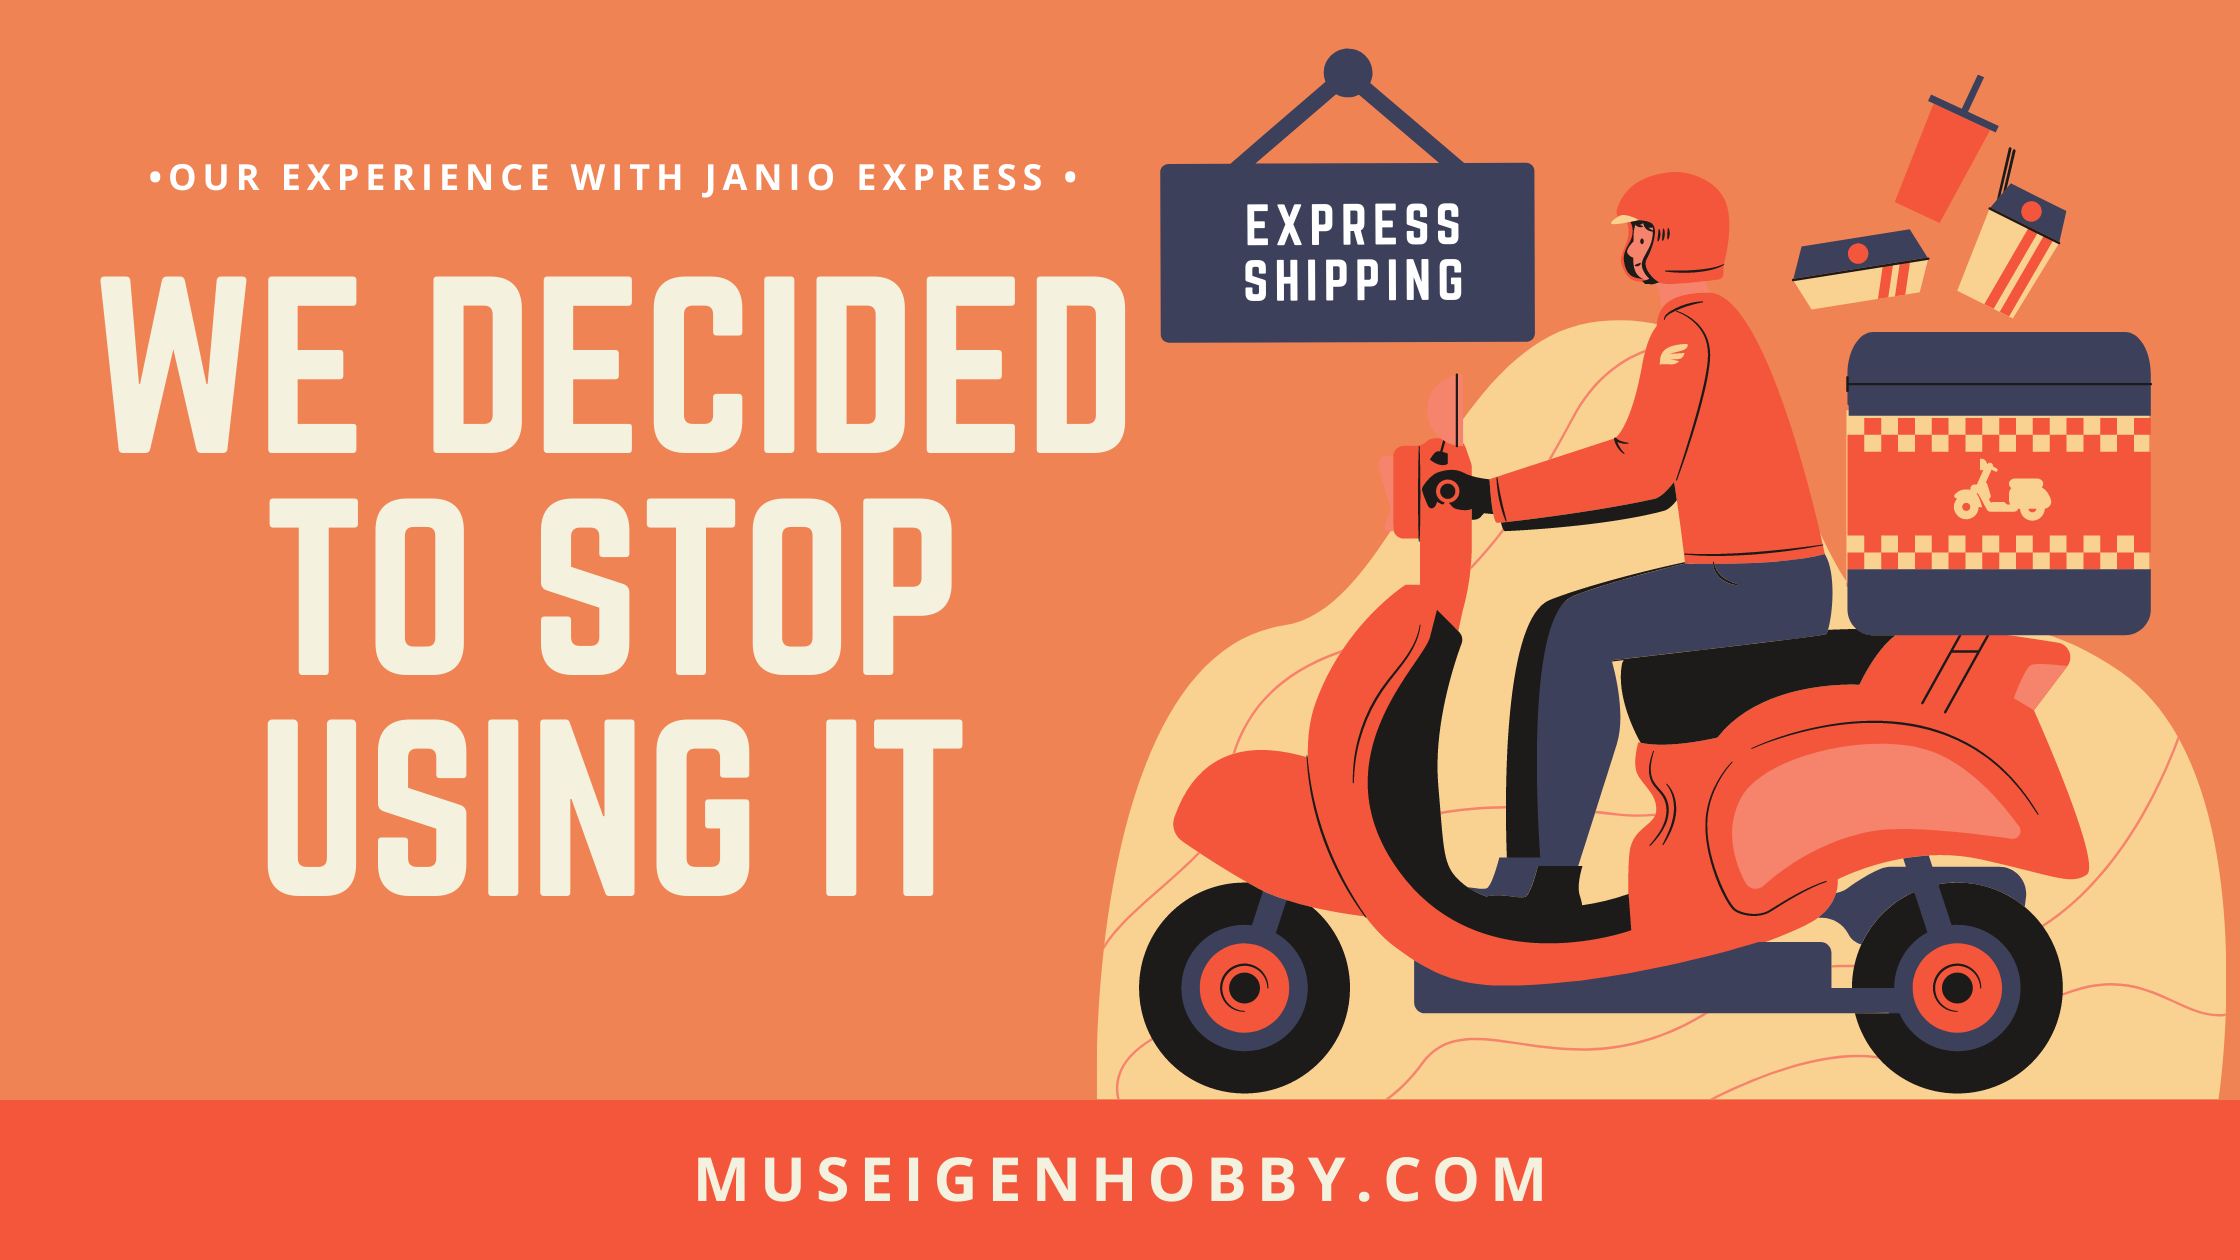 Our Experience With Janio Express